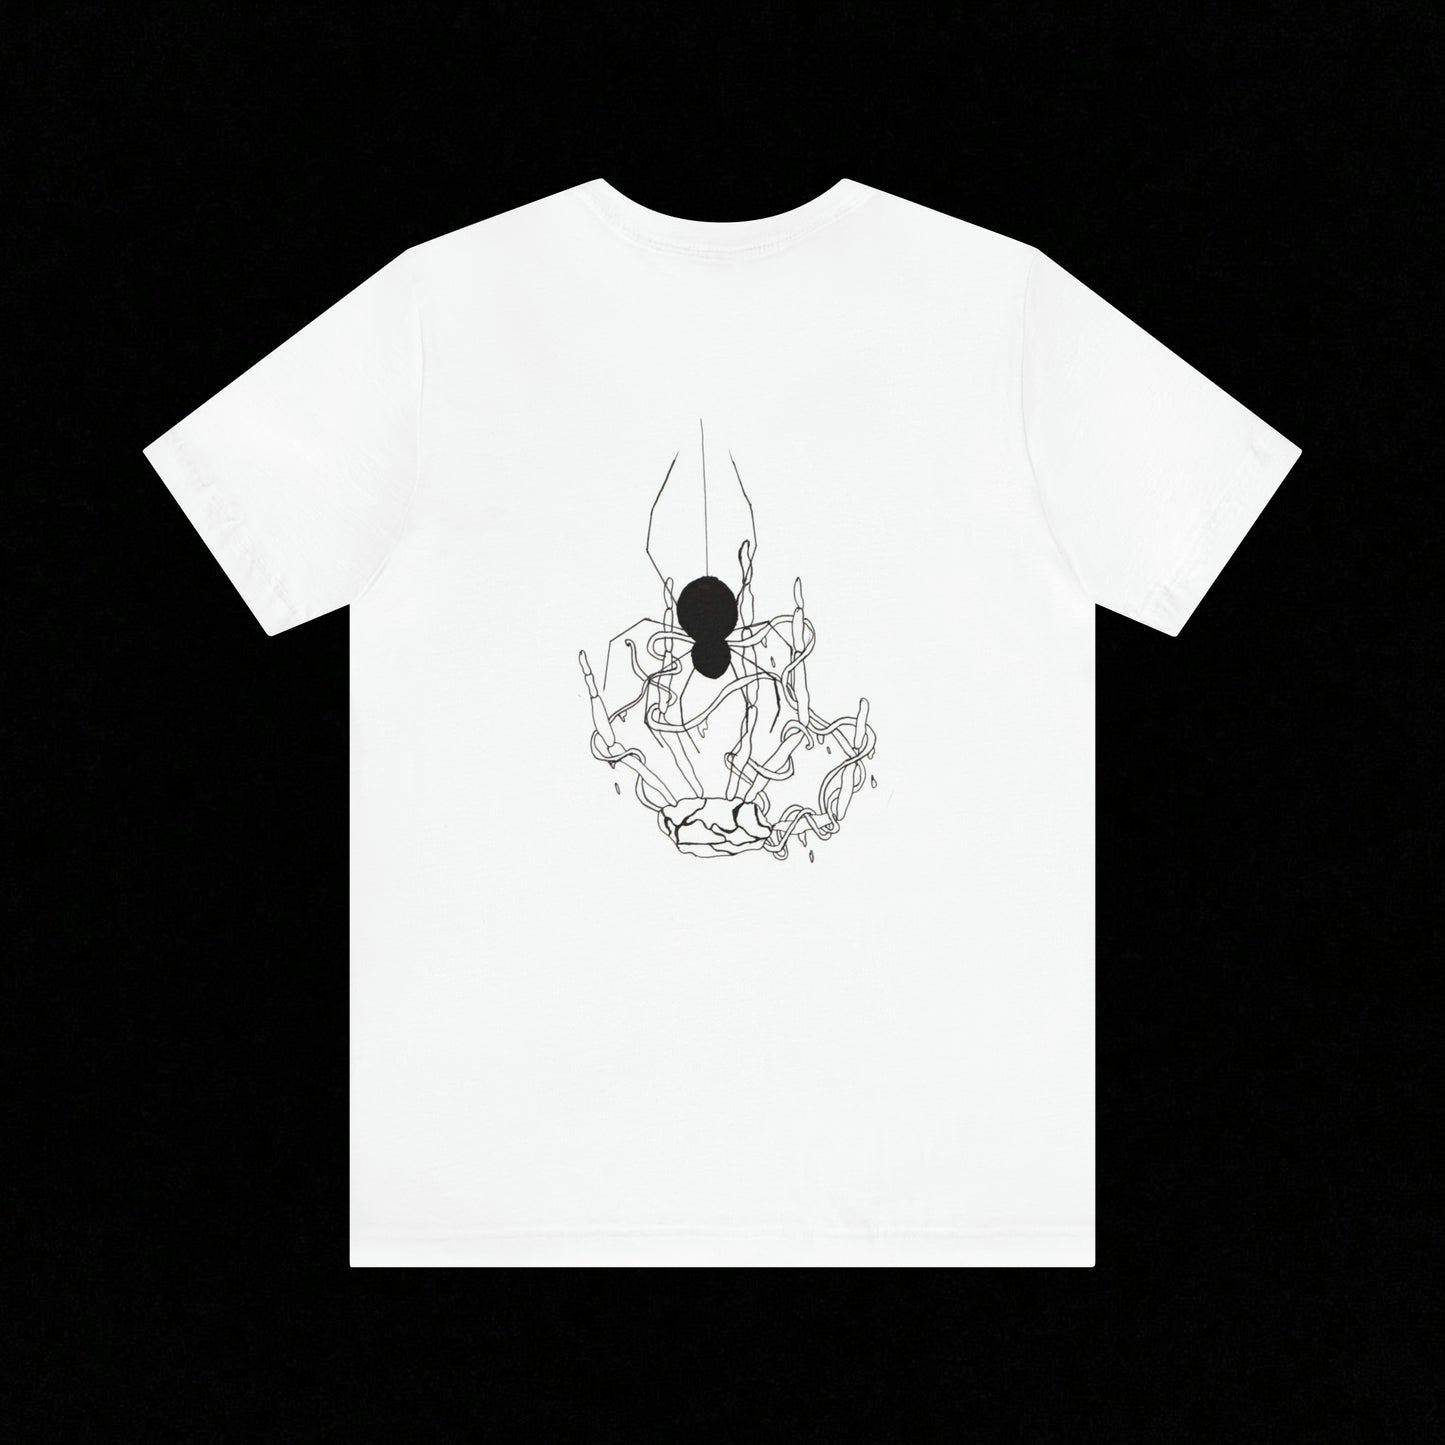 METIS FLOW T-SHIRT "The Spider"